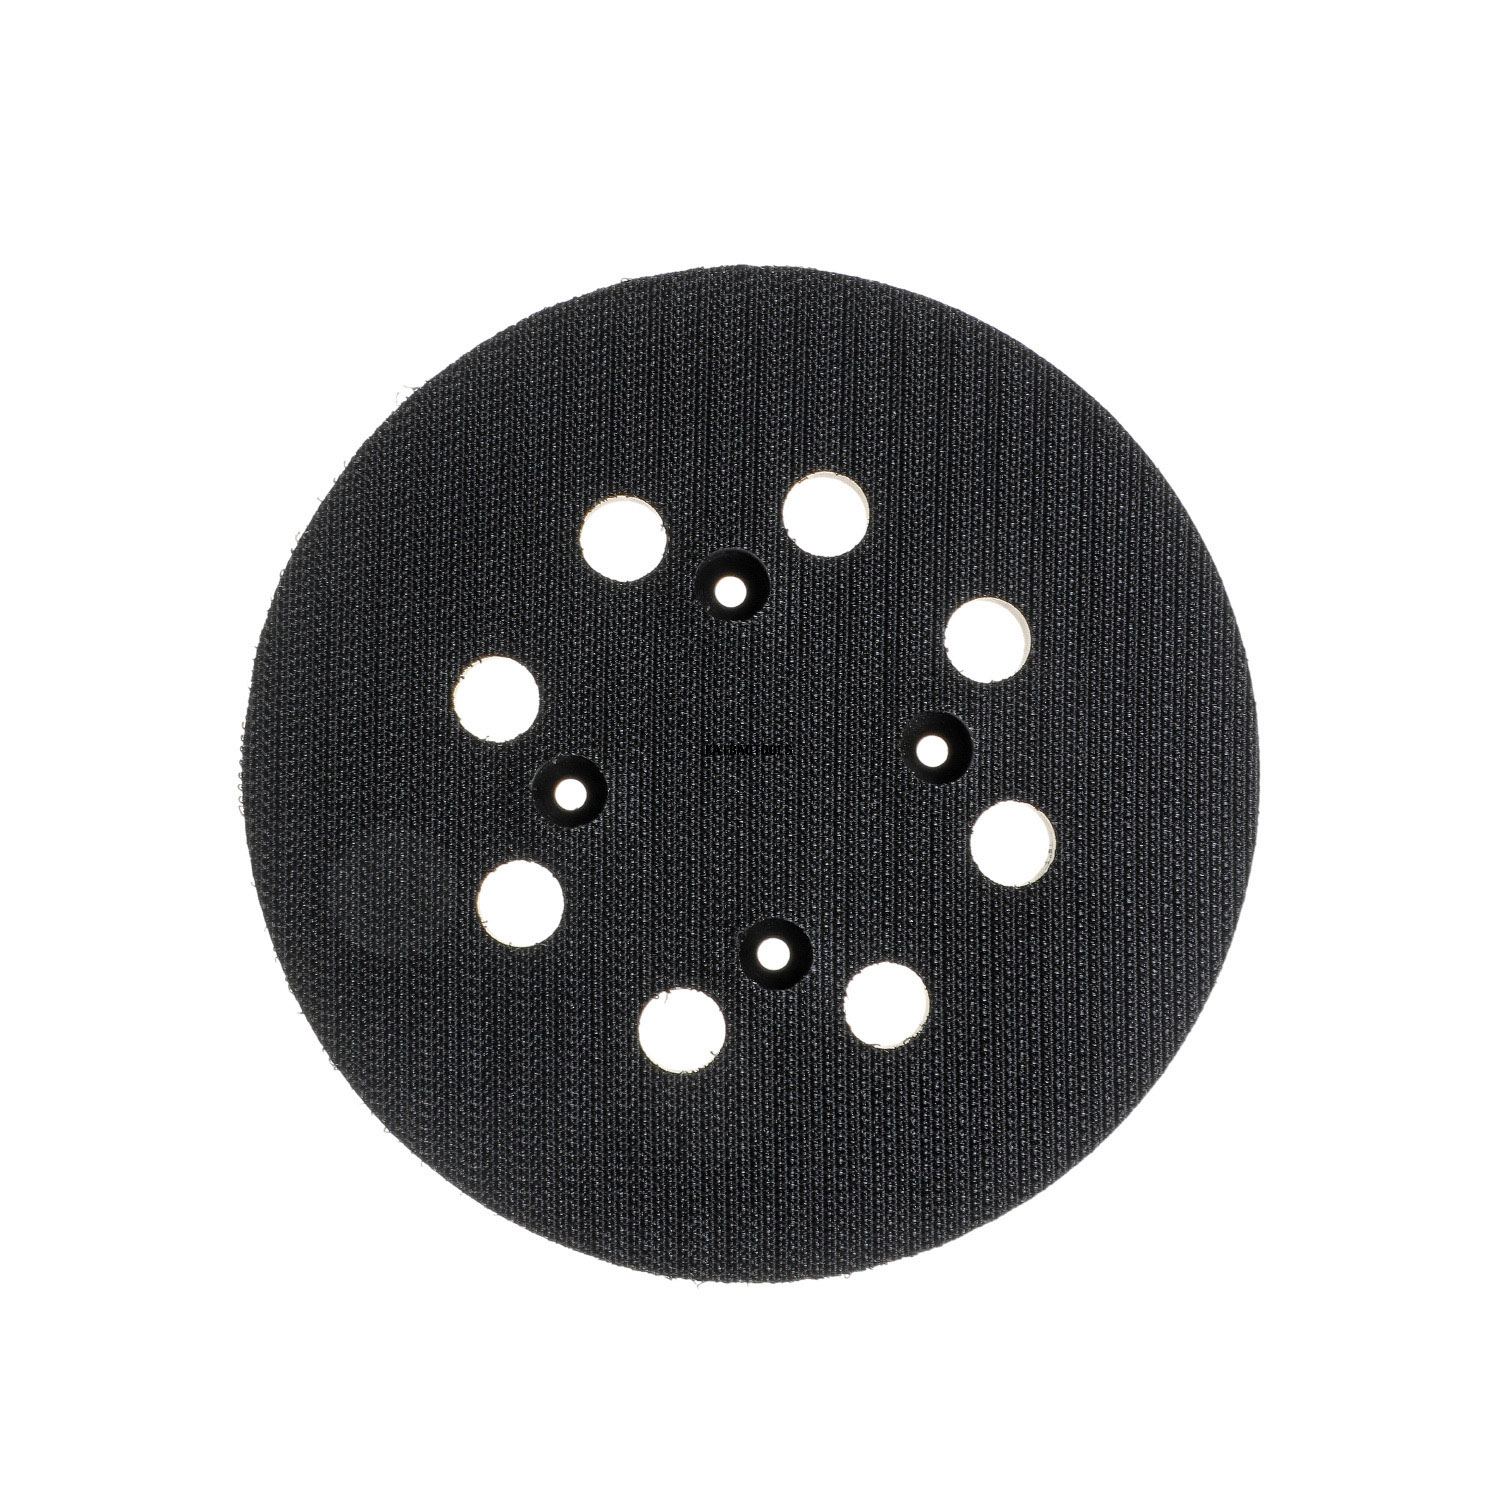 6 inch Vinyl PSA Face PU Backup Pad Replacement for electric sanders polisher Markita